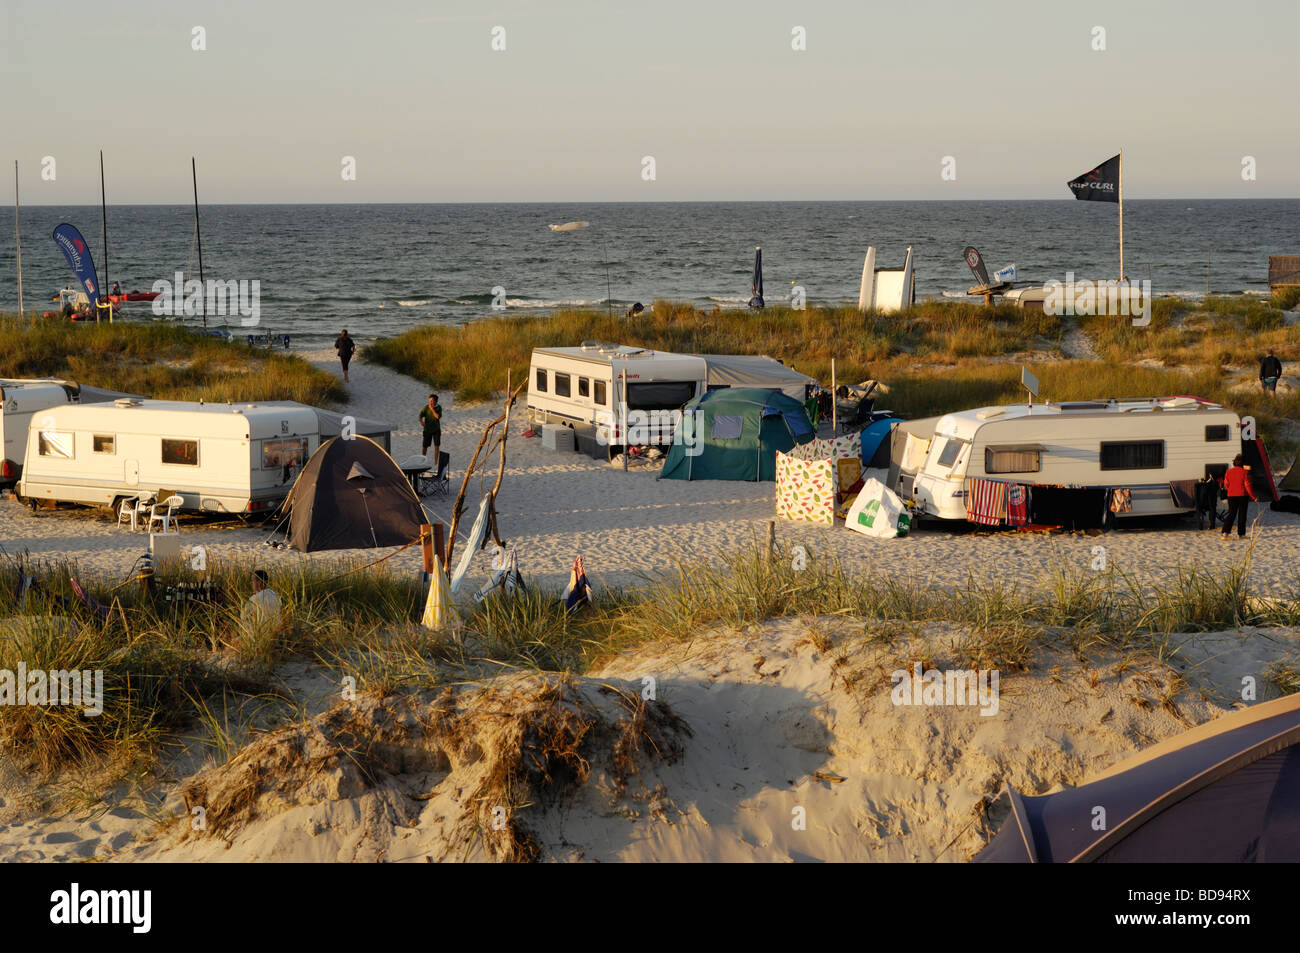 Camping ground on the beach in Prerow - Baltic Sea Stock Photo - Alamy